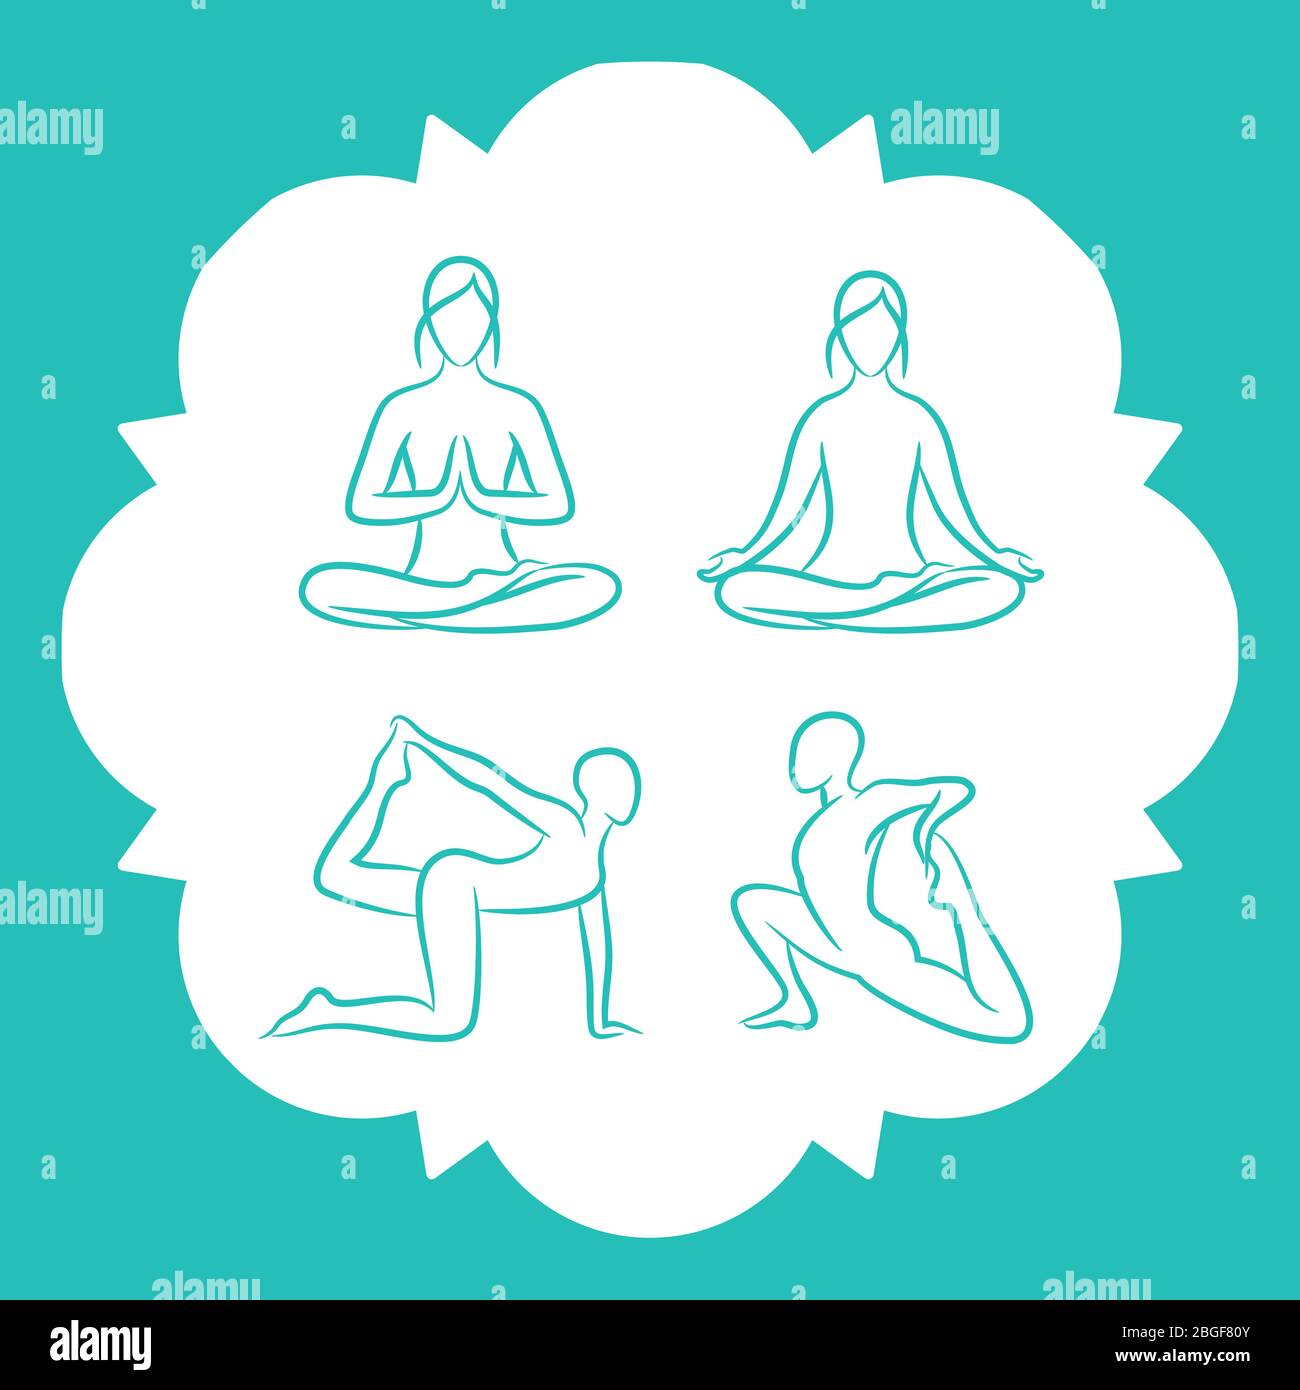 Hand drawn yoga poses vector line silhouettes of set illustration Stock Vector